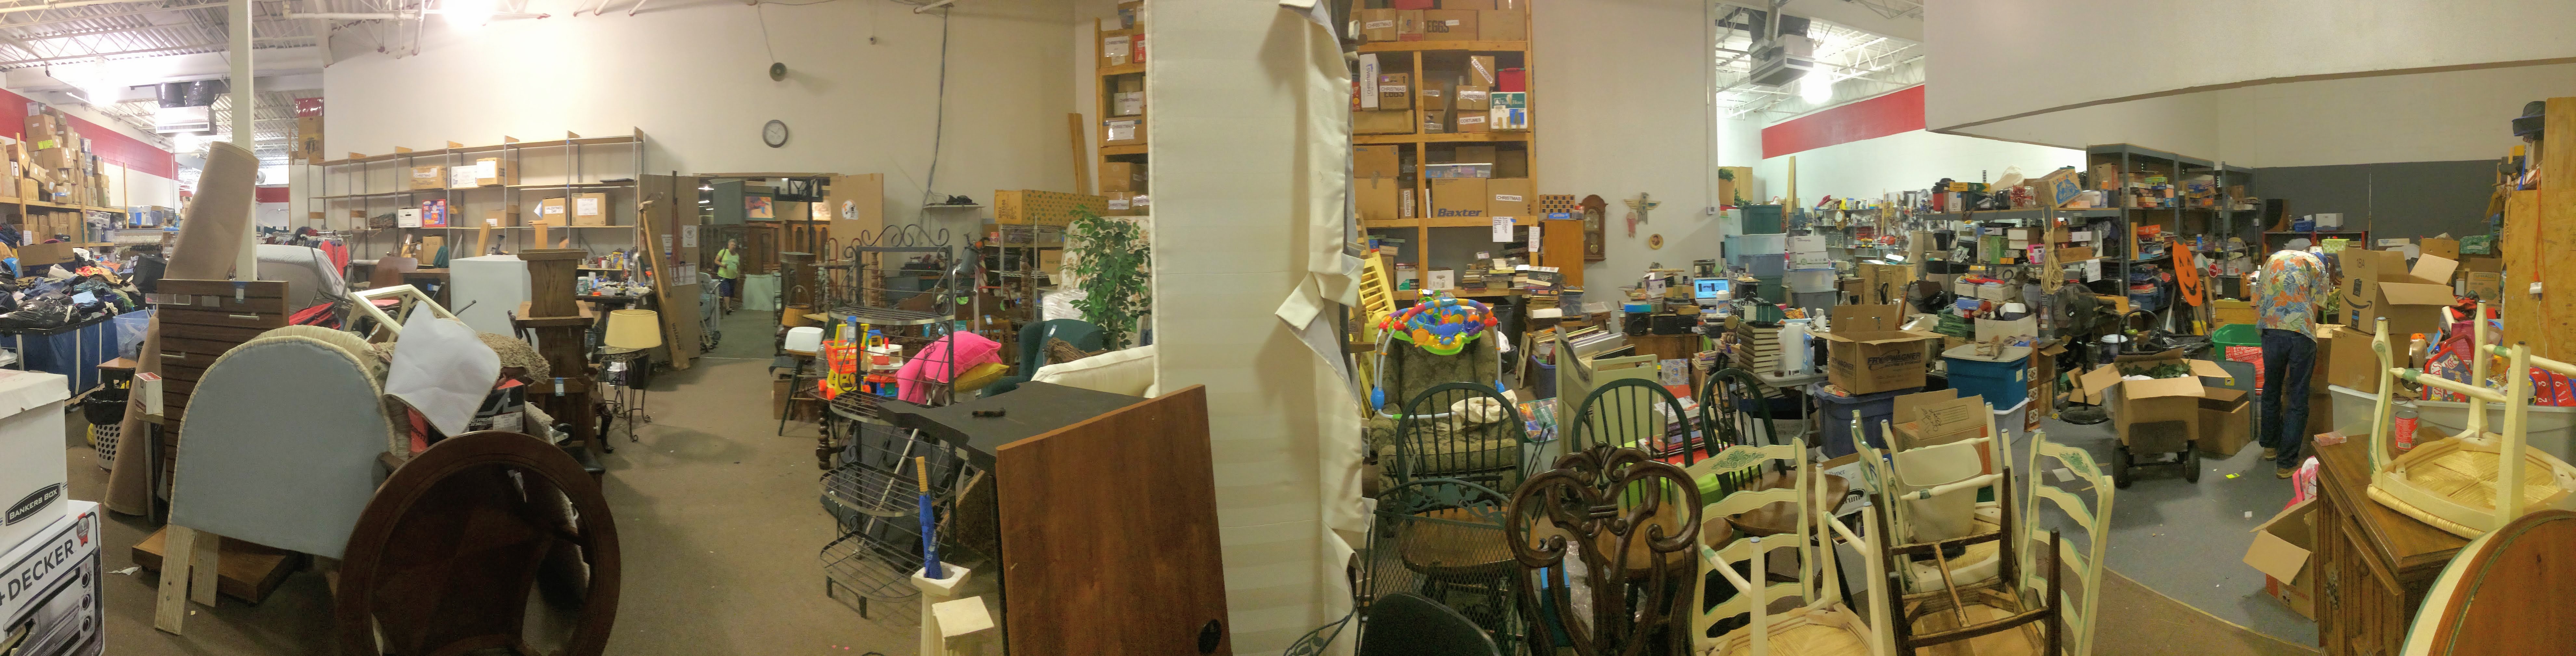 Volunteering and sorting a thrift store